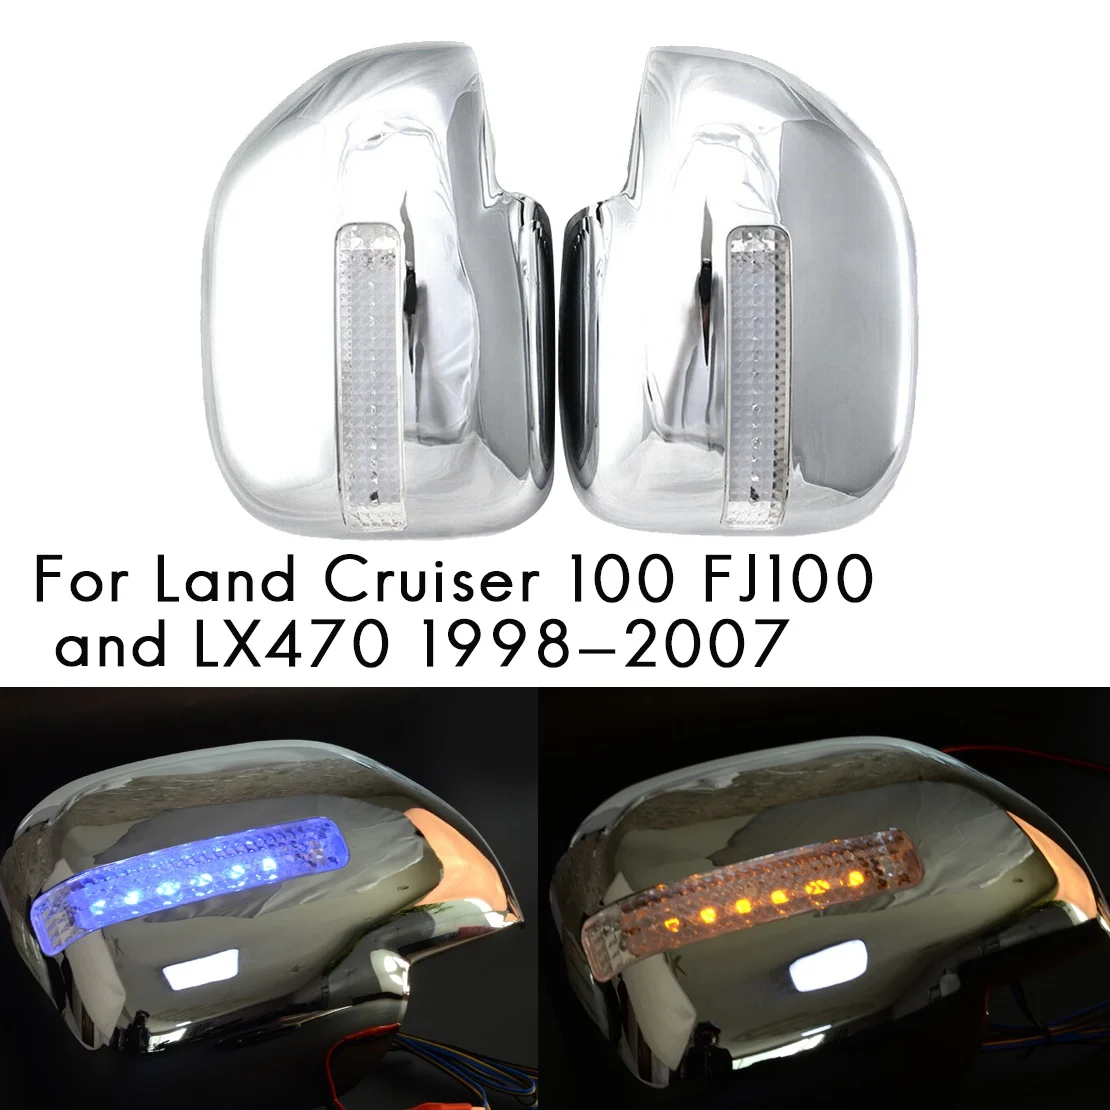 

for Toyota Land Cruiser 100 FJ100 Lexus LX470 1998-2007 Side Rearview Mirror Cover Cap with Turn Signal Light